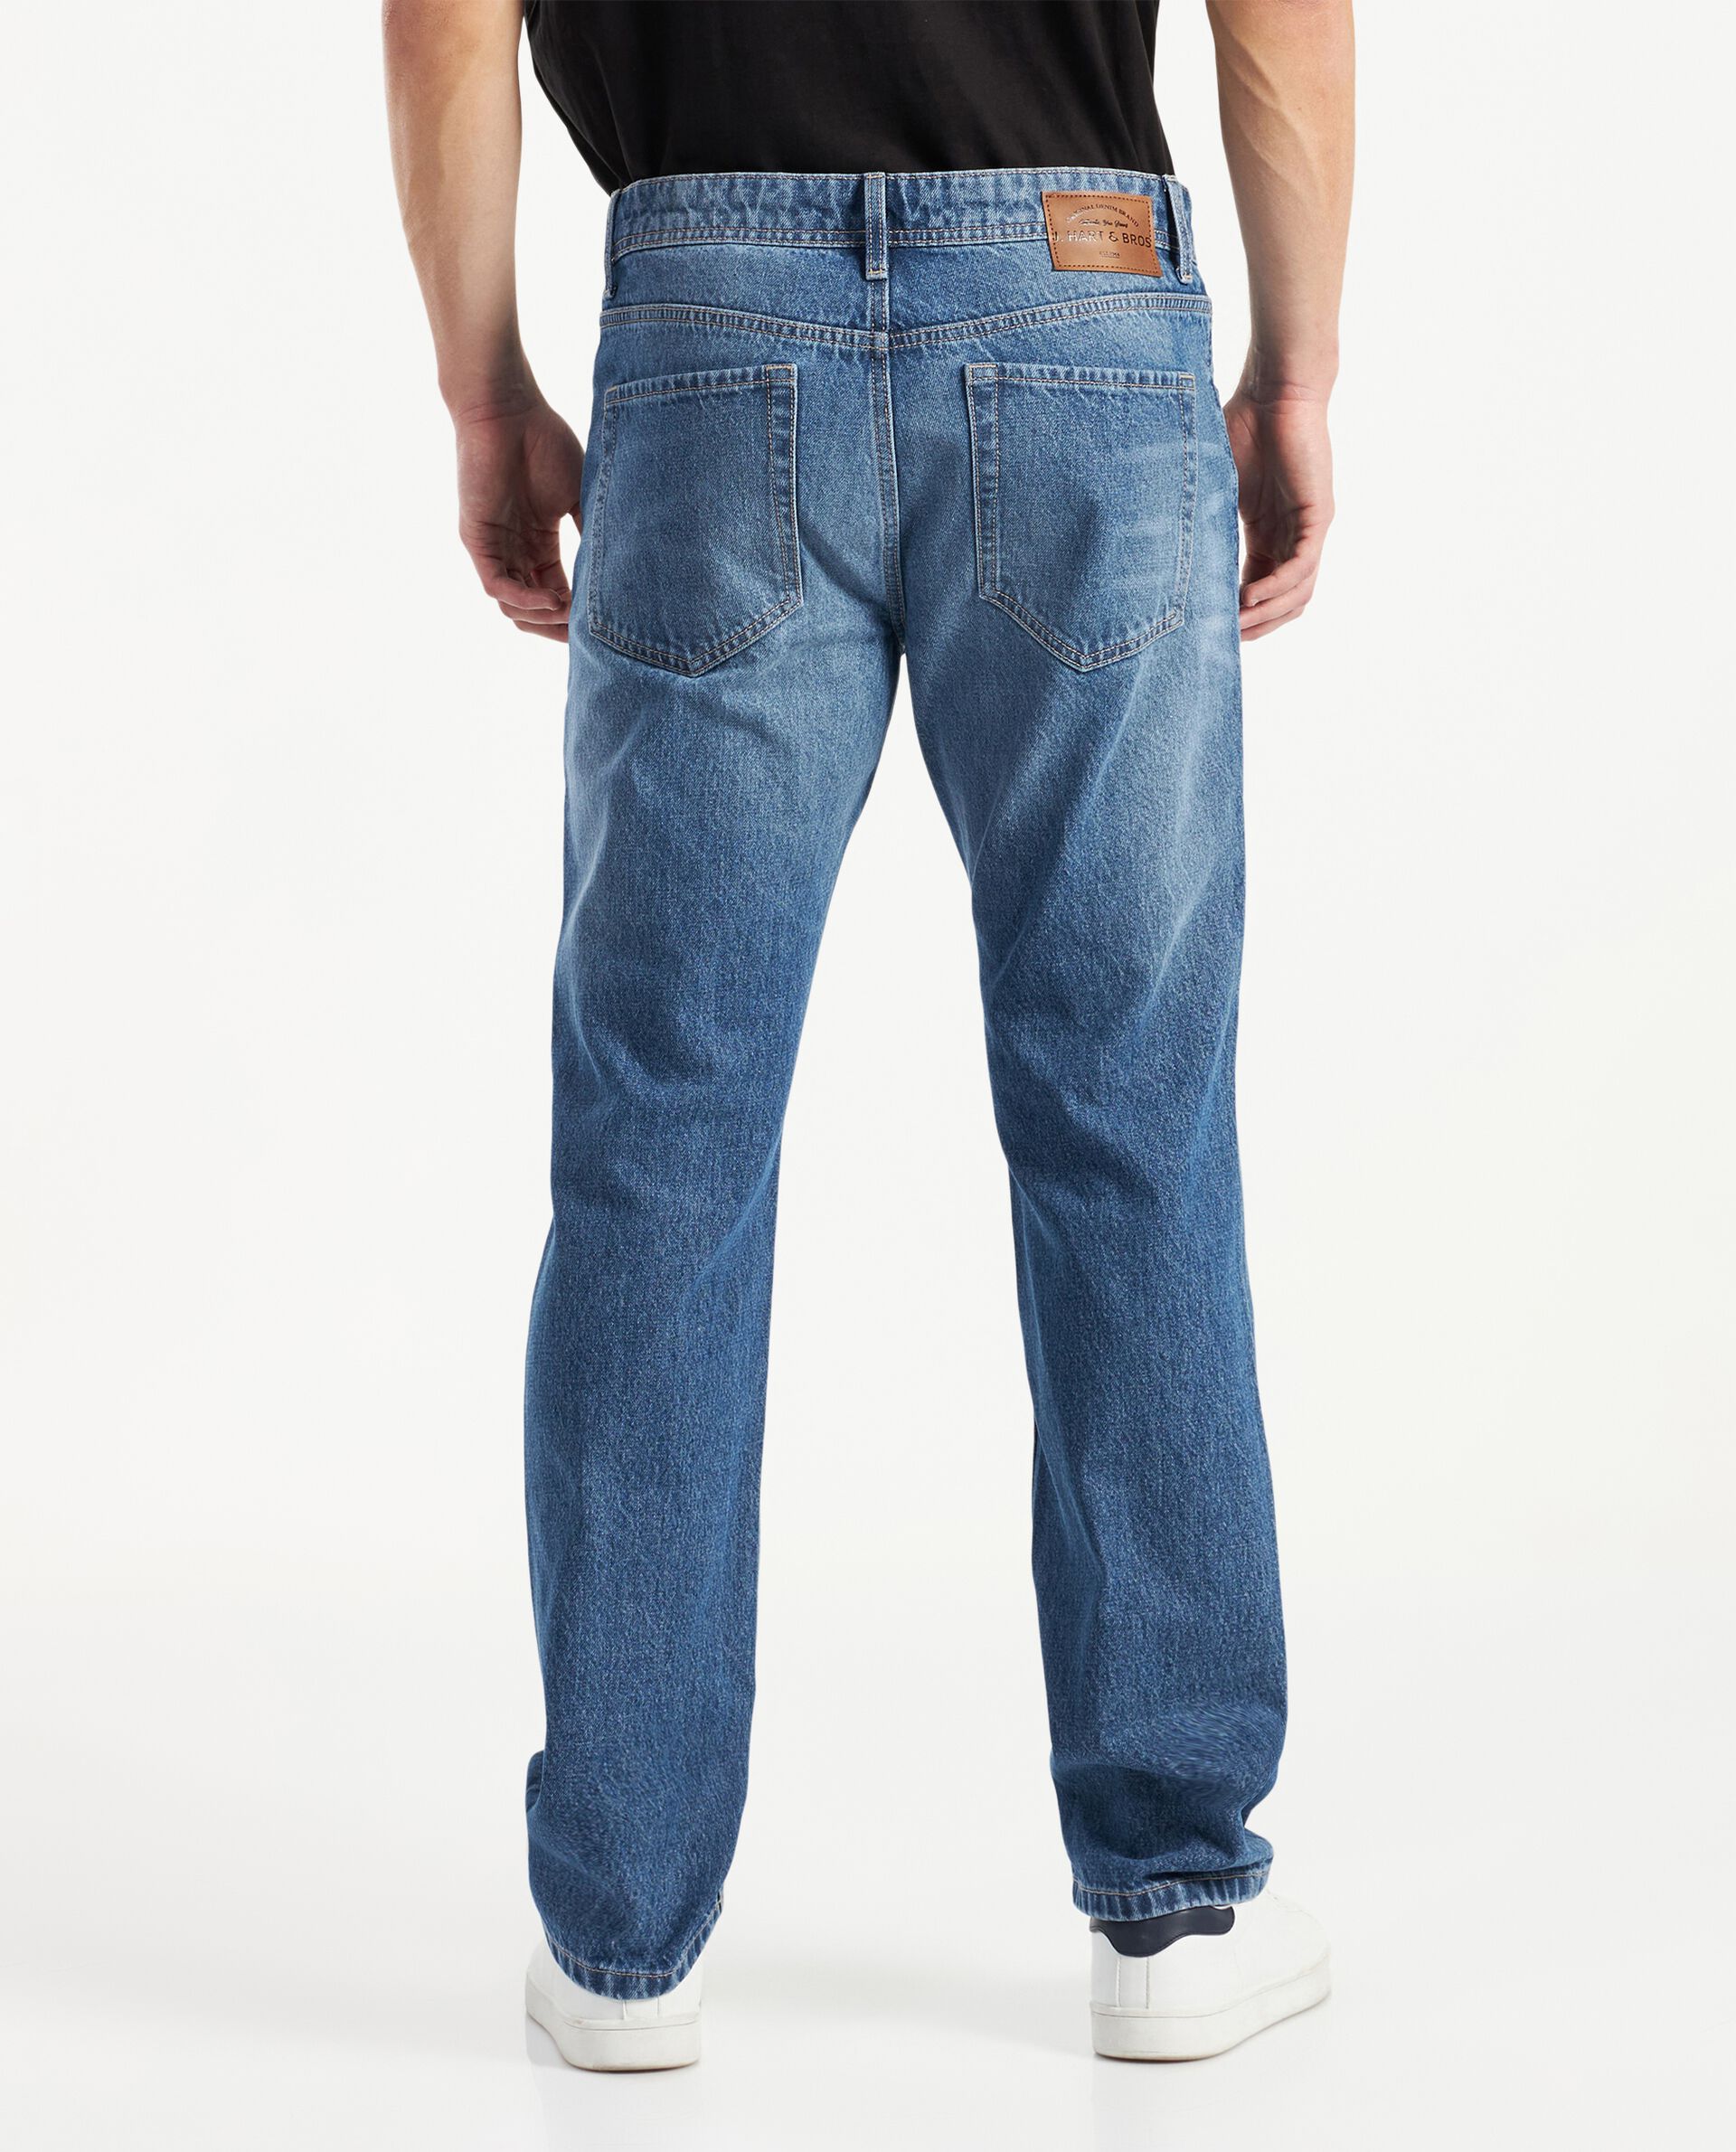 Jeans regular fit stone washed uomo